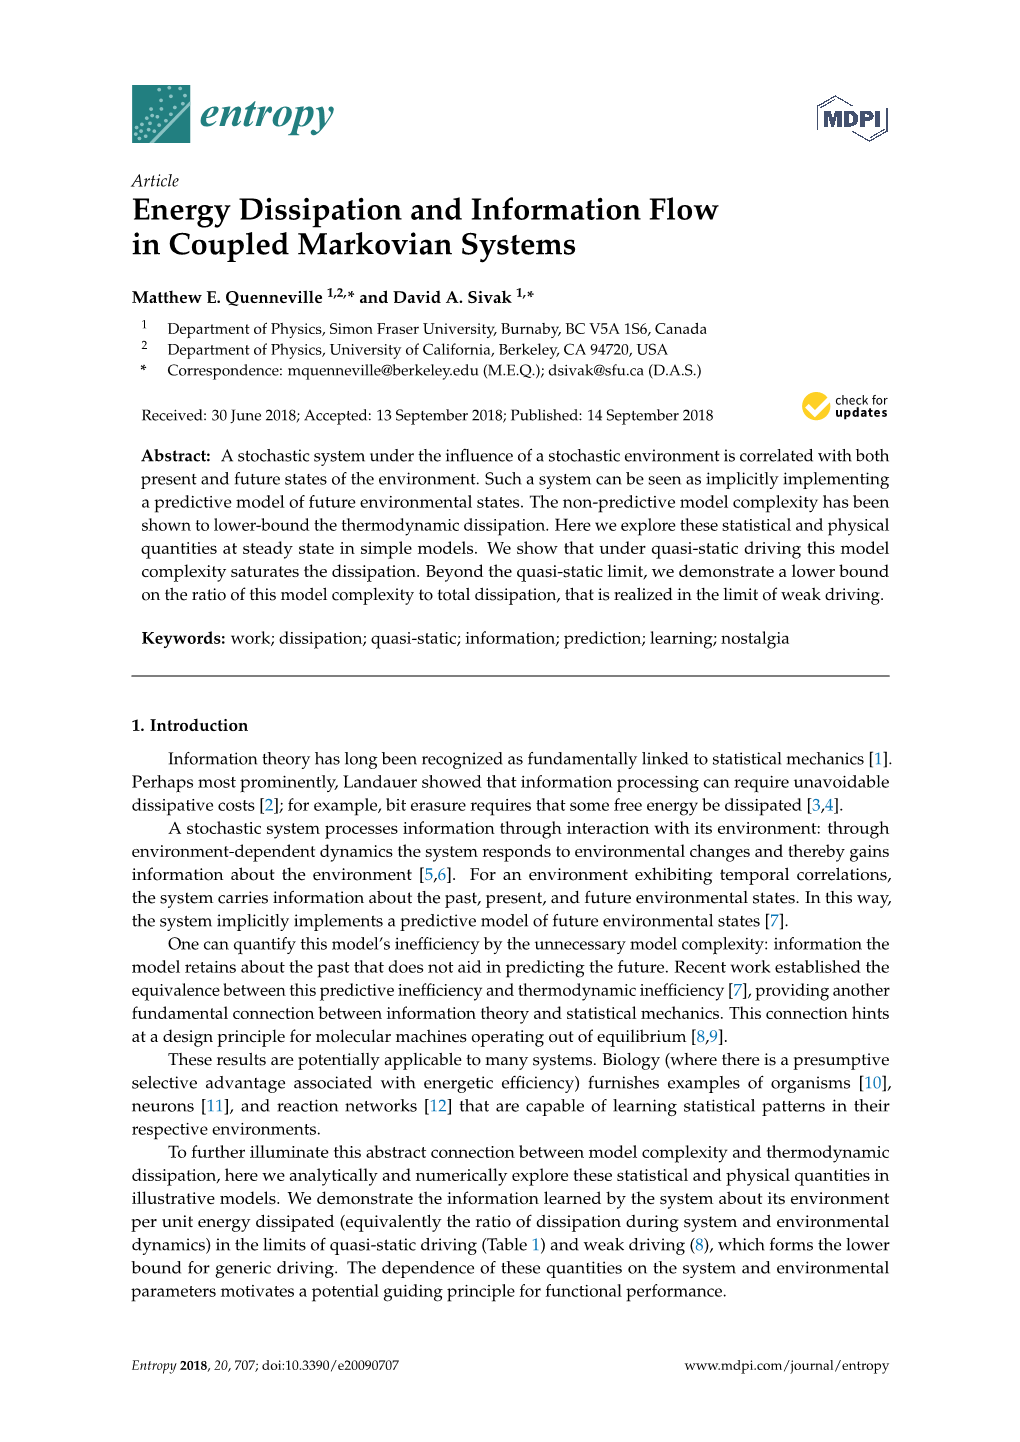 Energy Dissipation and Information Flow in Coupled Markovian Systems